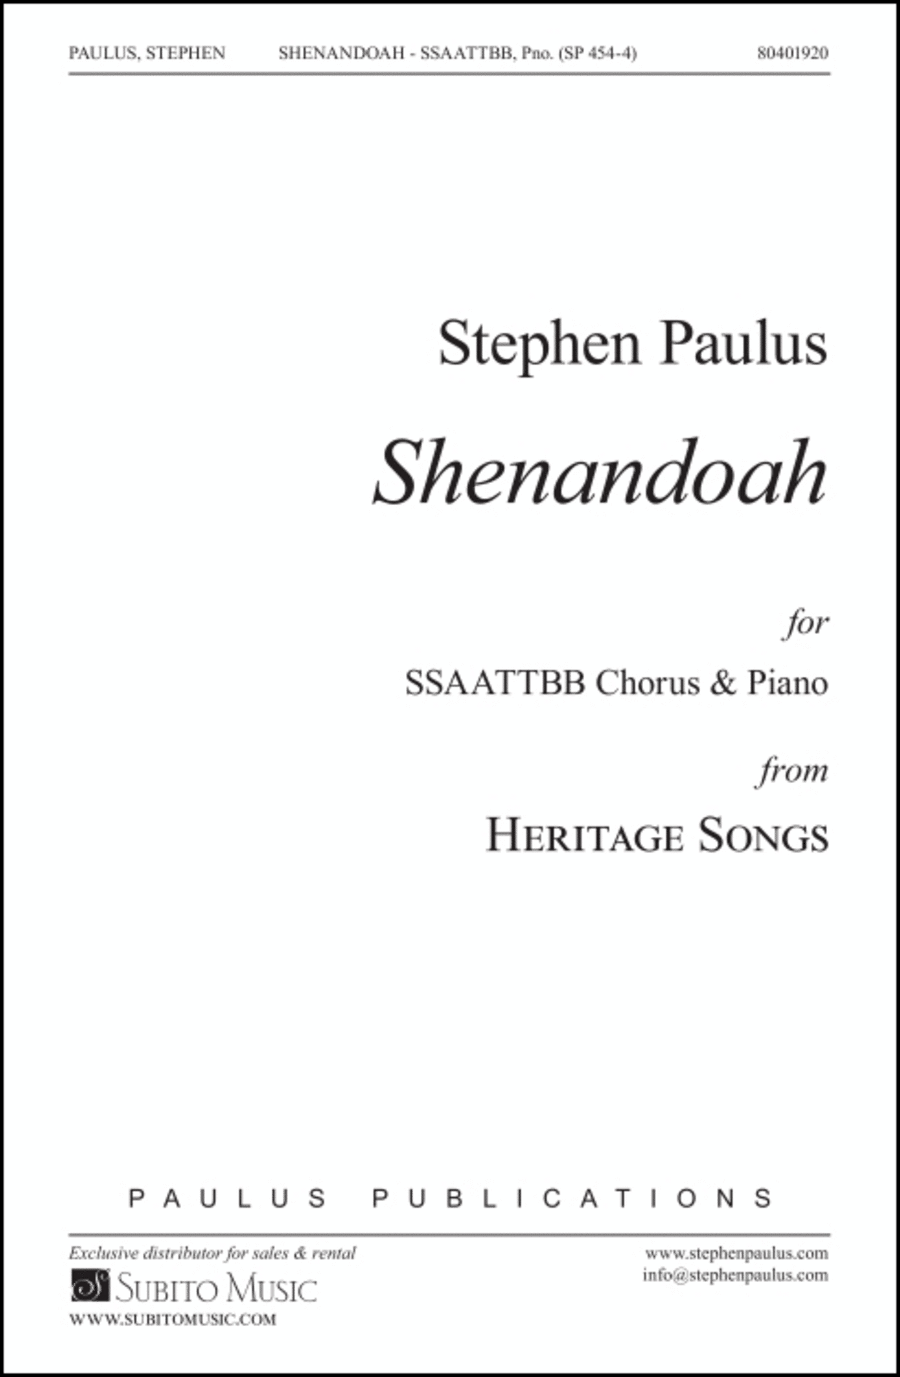 Shenandoah (from HERITAGE SONGS)